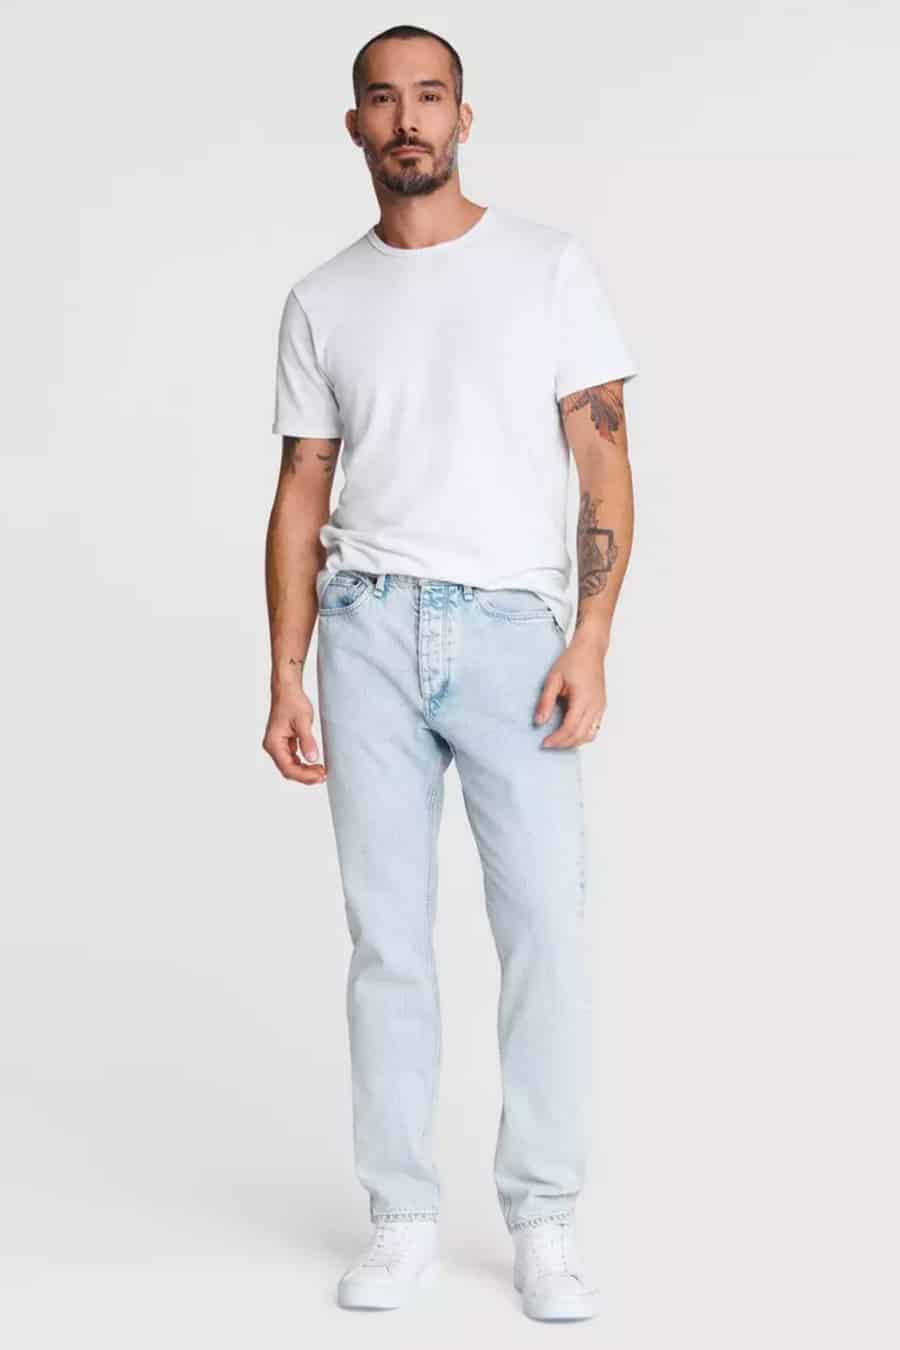 Men's light blue wash denim jeans, white T-shirt and white sneakers outfit